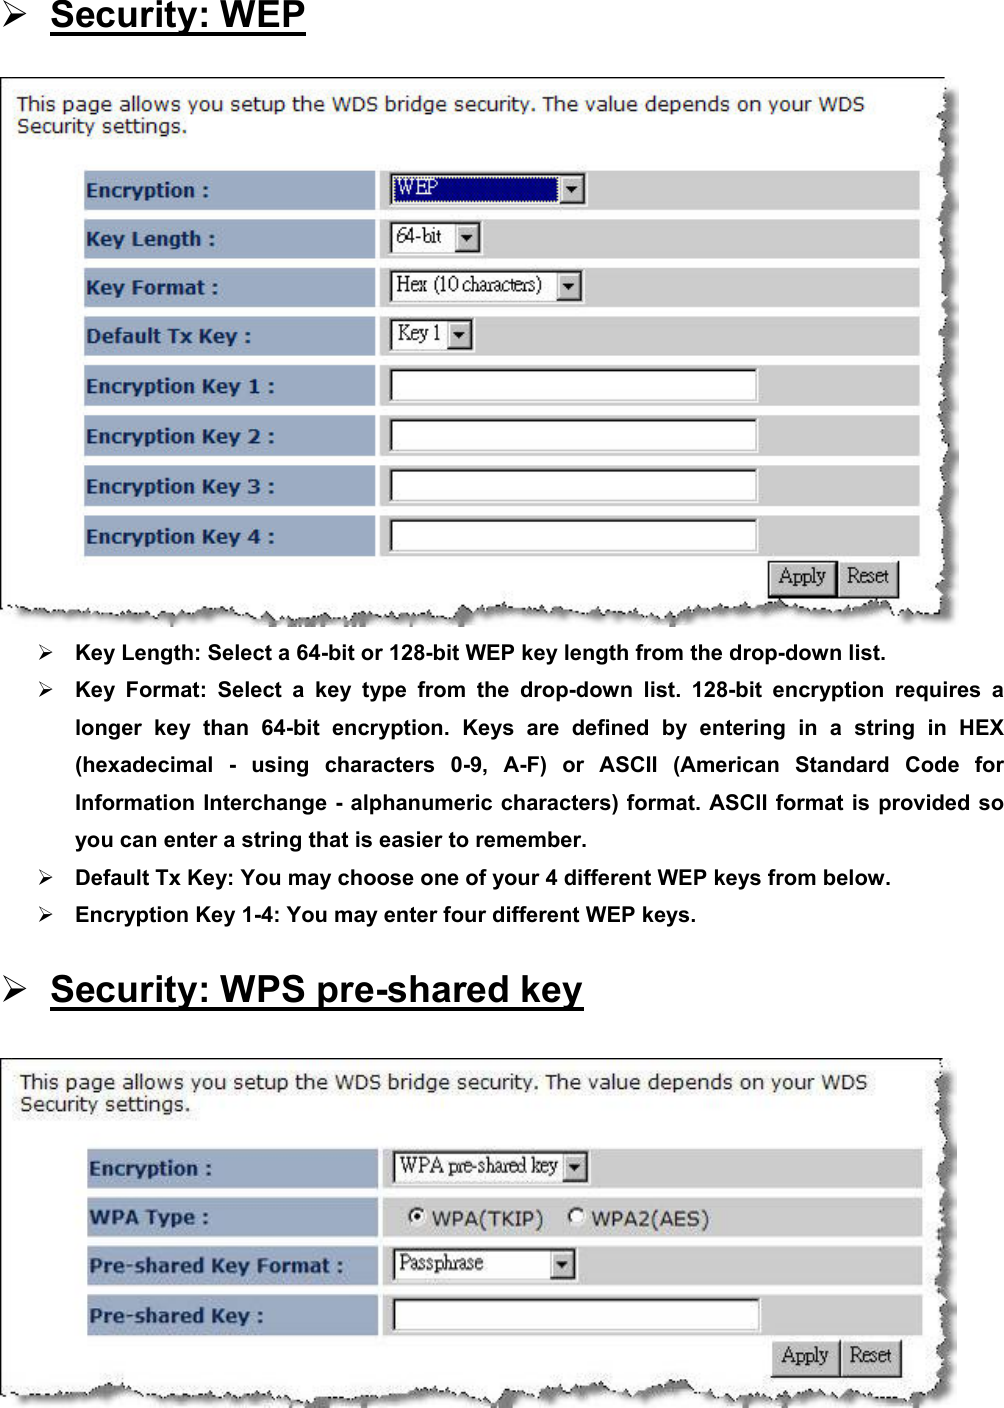 ¾ Security: WEP  ¾ Key Length: Select a 64-bit or 128-bit WEP key length from the drop-down list.   ¾ Key Format: Select a key type from the drop-down list. 128-bit encryption requires a longer key than 64-bit encryption. Keys are defined by entering in a string in HEX (hexadecimal - using characters 0-9, A-F) or ASCII (American Standard Code for Information Interchange - alphanumeric characters) format. ASCII format is provided so you can enter a string that is easier to remember. ¾ Default Tx Key: You may choose one of your 4 different WEP keys from below.   ¾ Encryption Key 1-4: You may enter four different WEP keys.   ¾ Security: WPS pre-shared key  